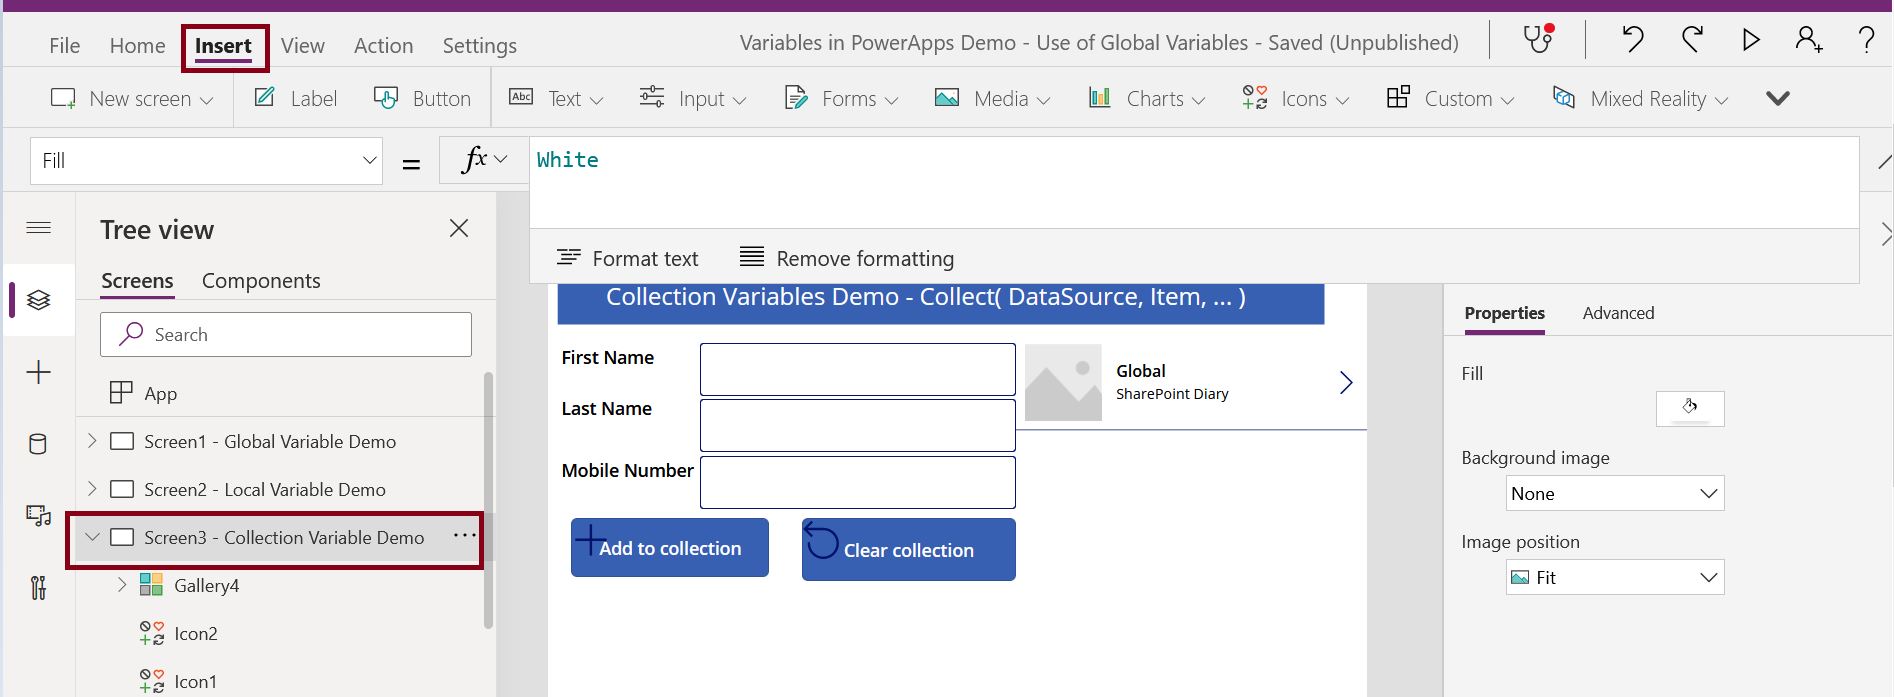 Design contact information form in PowerApps